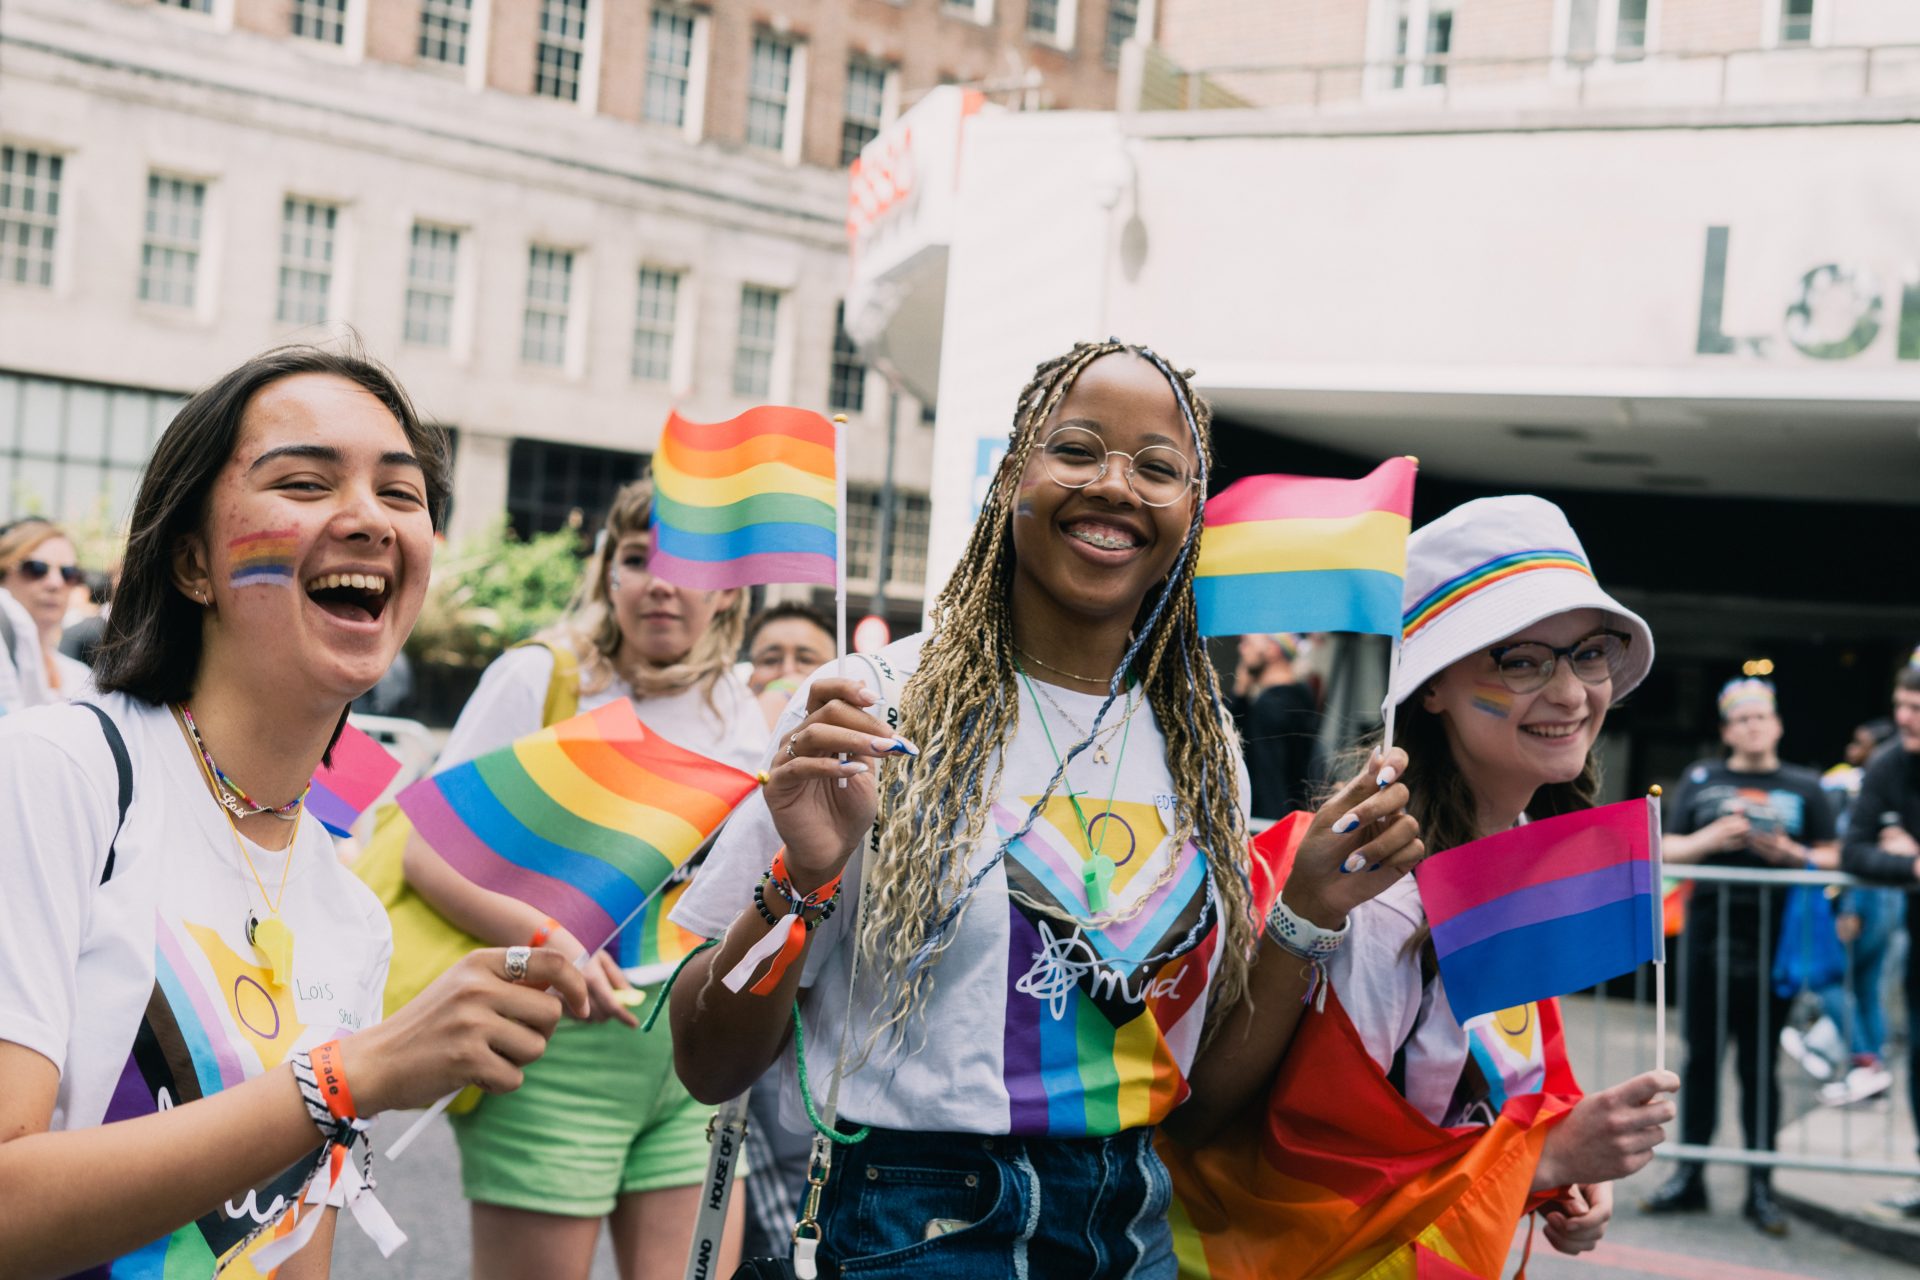 Young people celebrating at Pride event